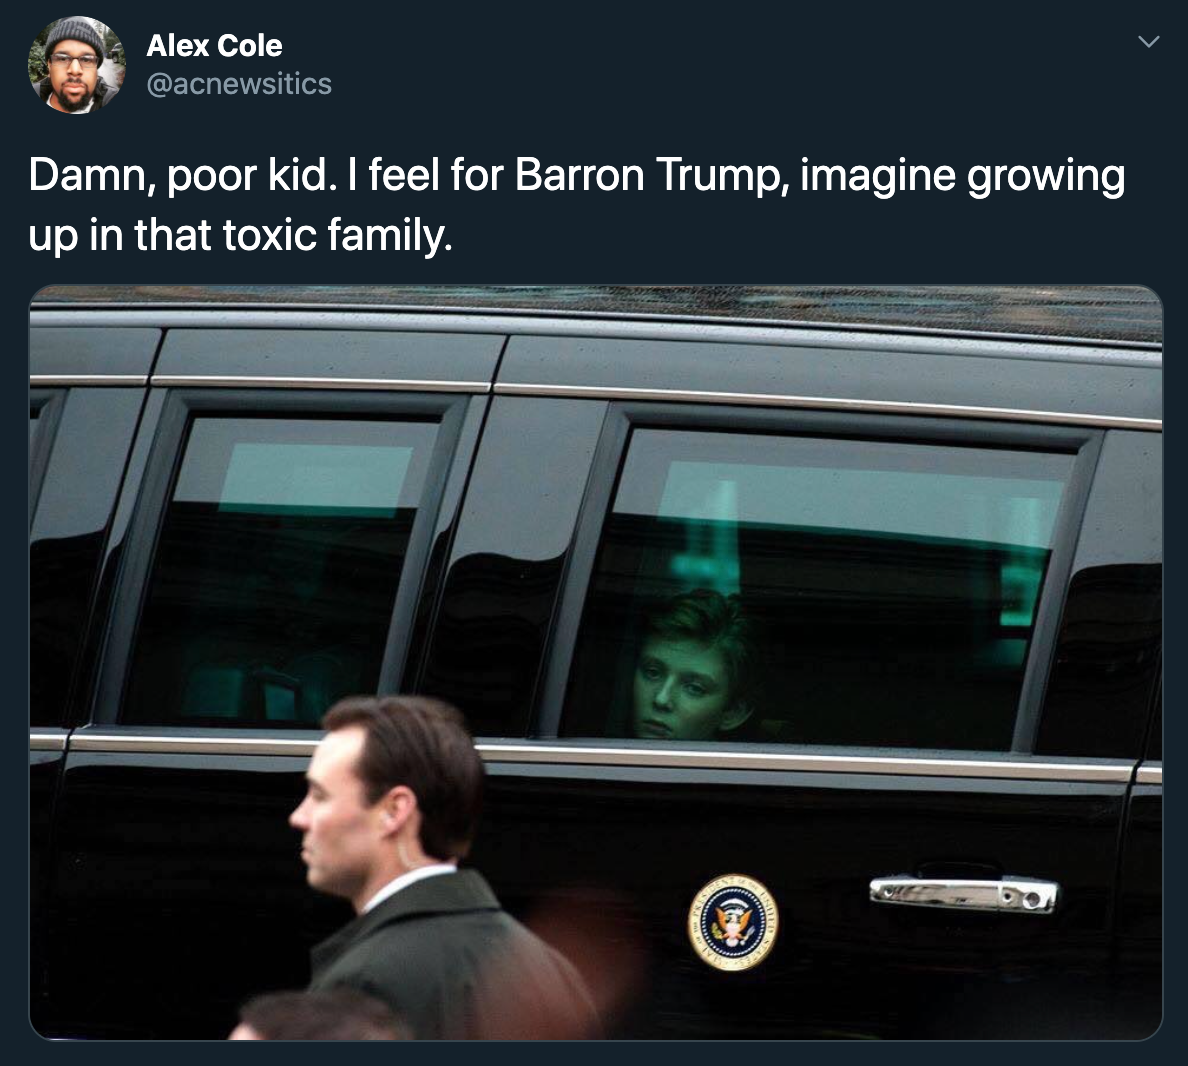 Damn, poor kid. I feel for Barron Trump, imagine growing up in that toxic family.